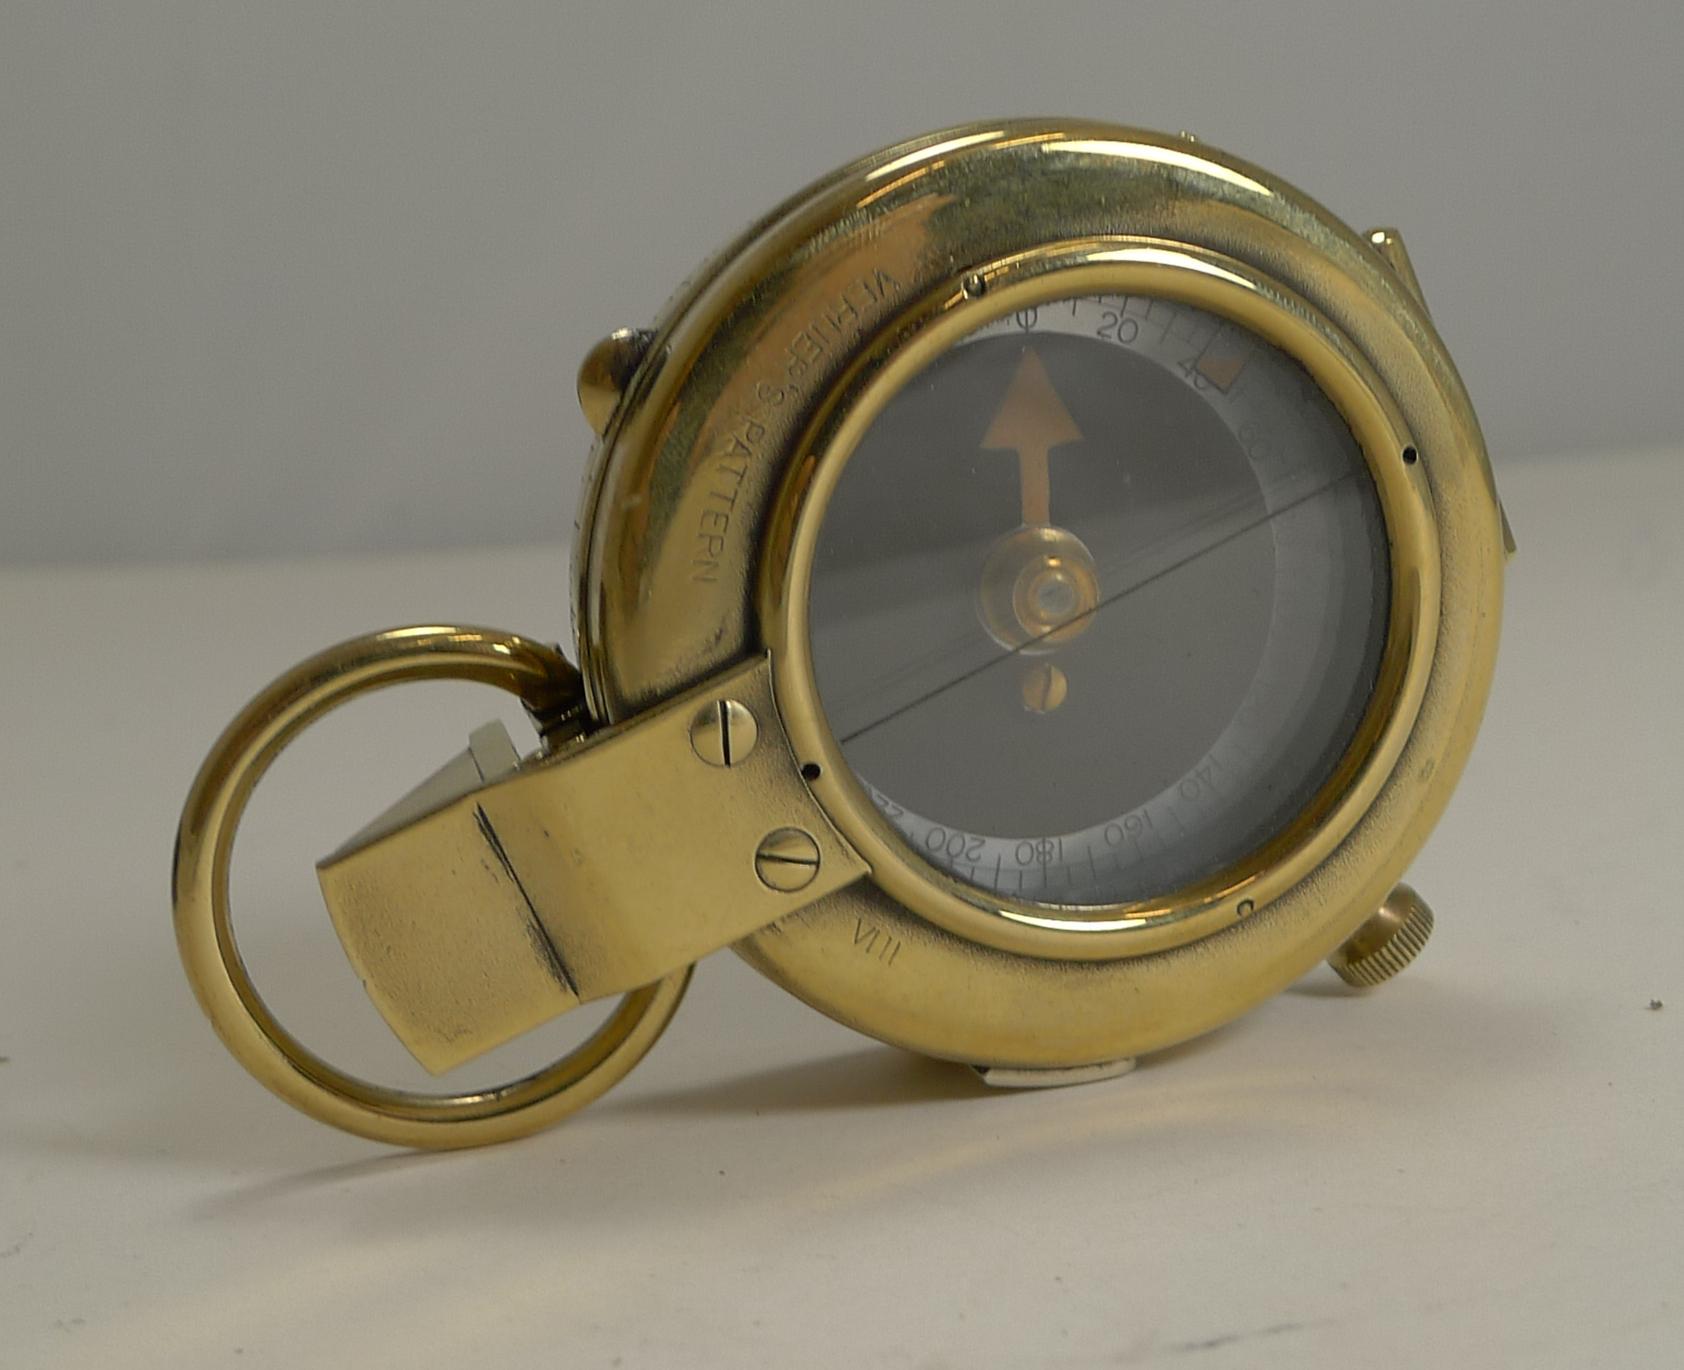 English WW1 1917 British Army Officer's Compass Verner's Patent MK VIII by French Ltd